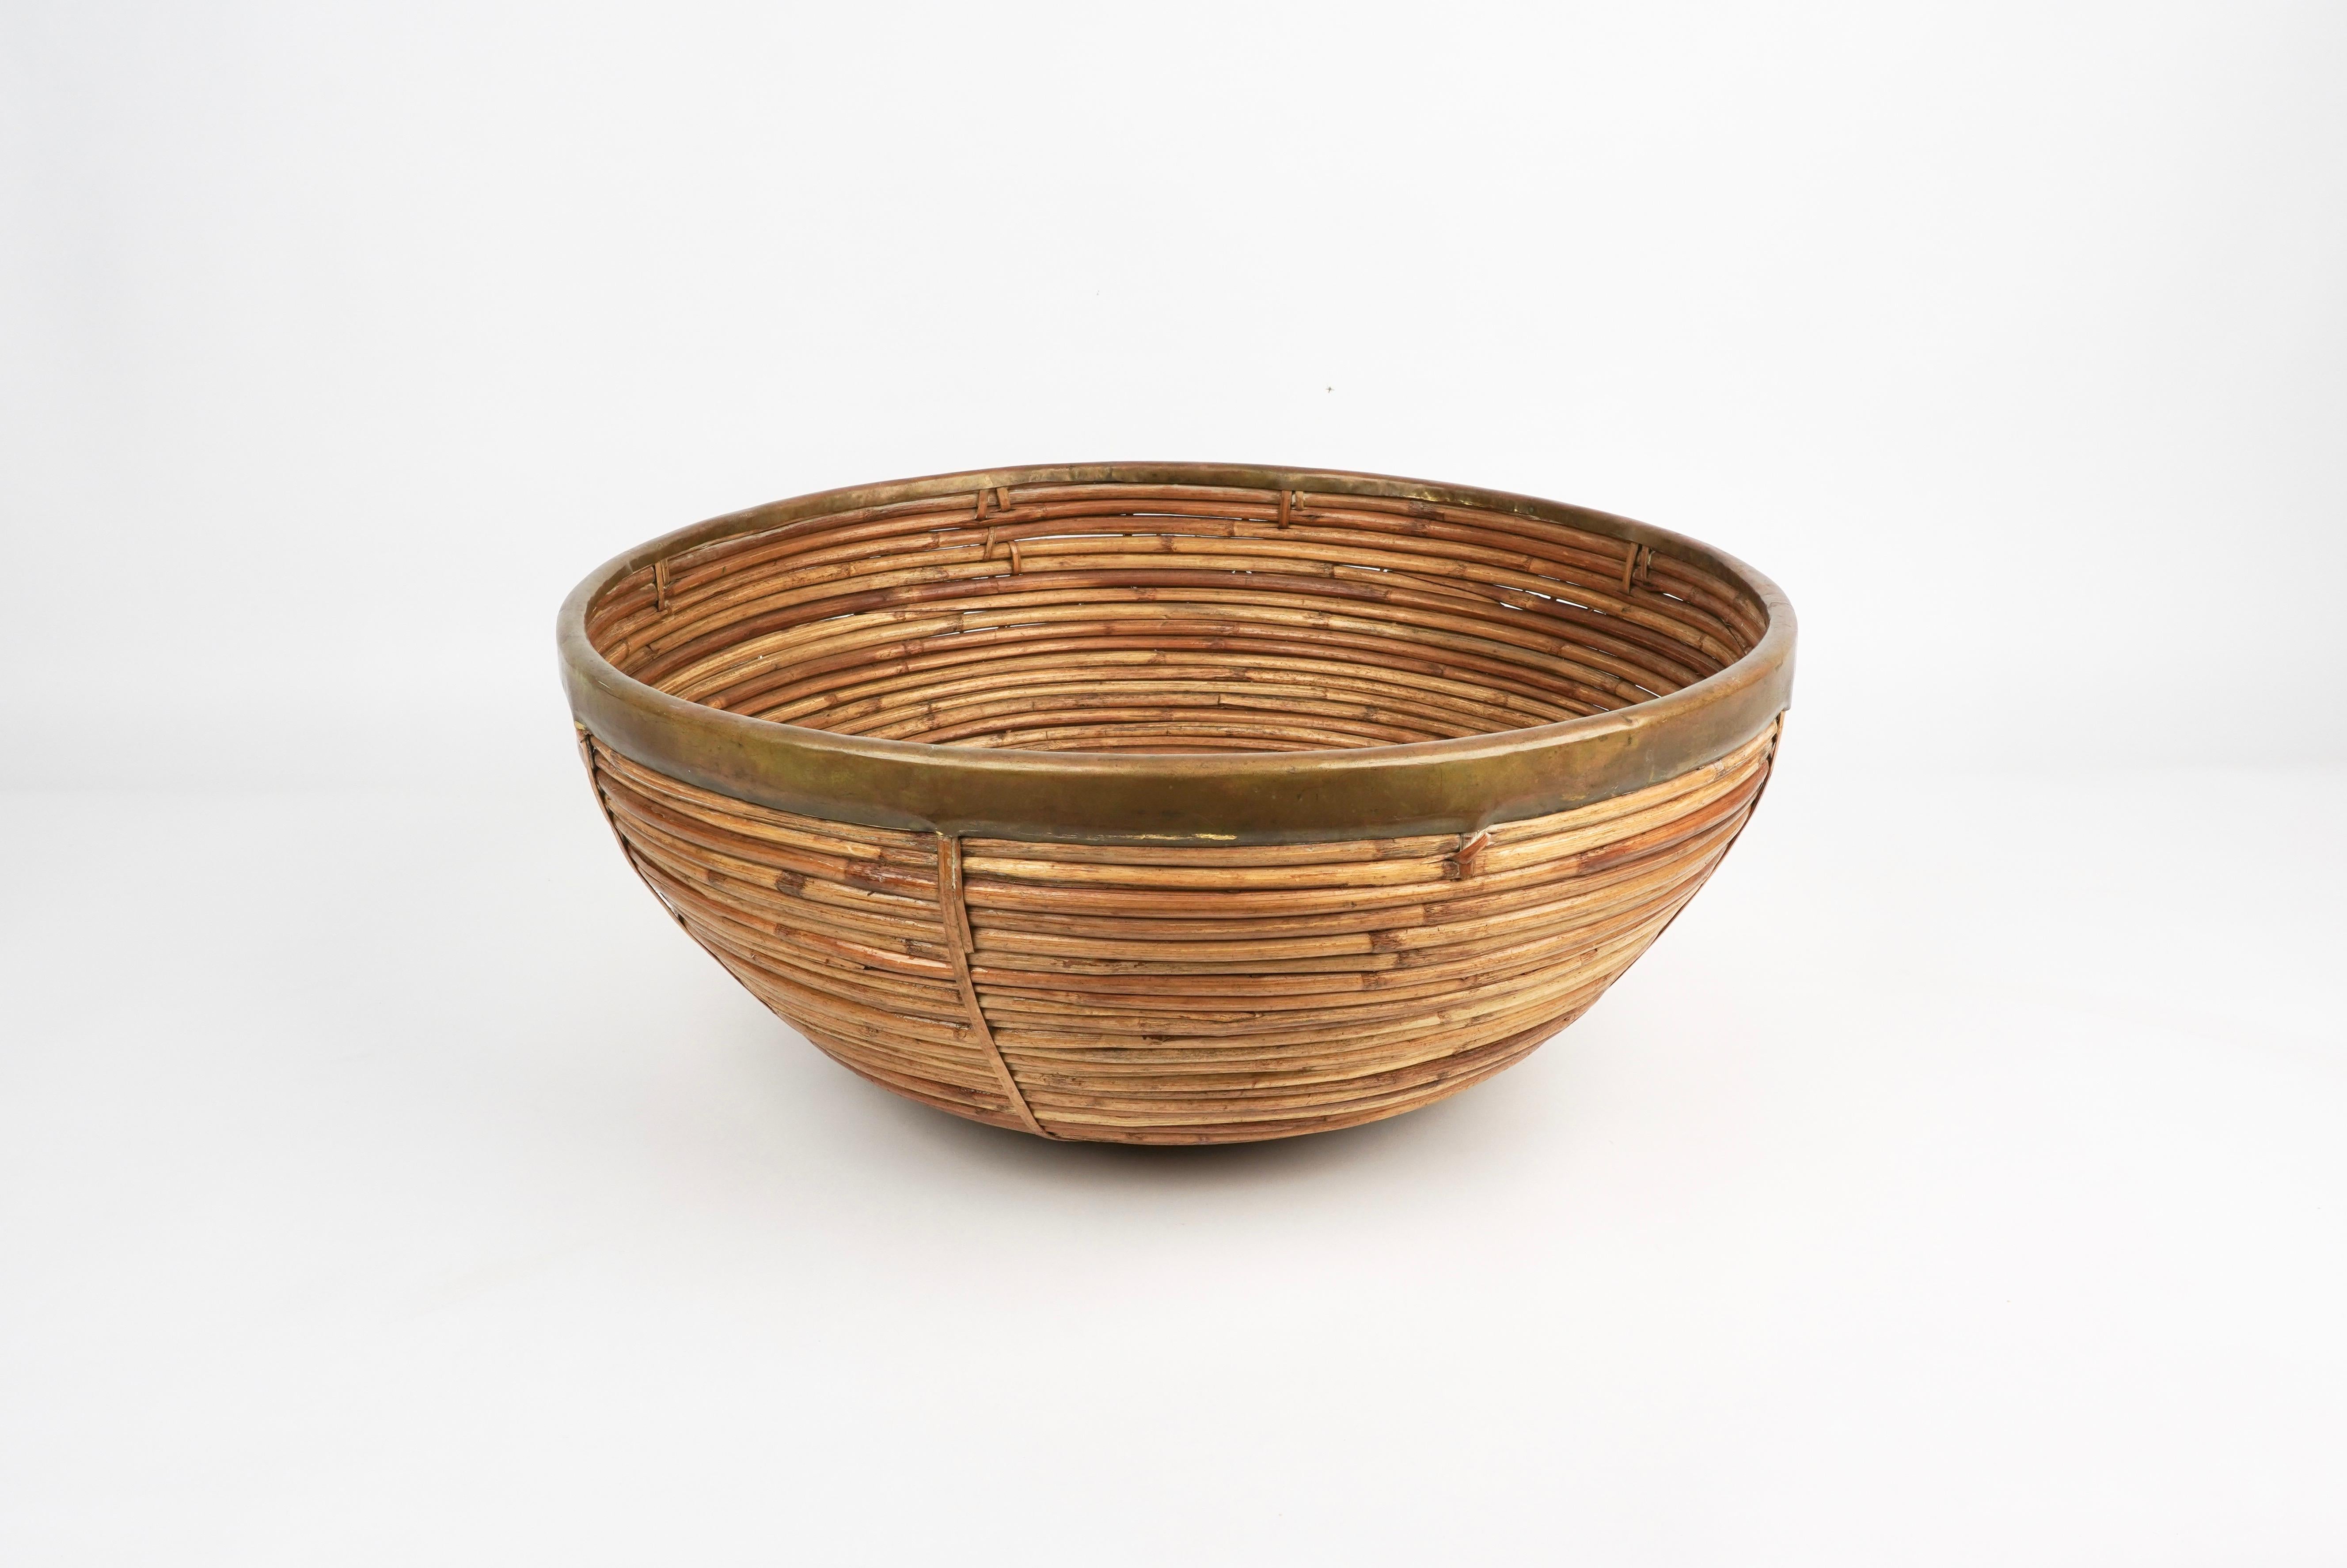 Mid-Century Modern brass and bamboo / rattan large oval bowl, centerpiece or basket.
It has a brass trim covering the top.
Handcrafted in Italy, 1960s.
Use it as fruit bowl or centerpiece to add a stylish midcentury accent in a kitchen. Perfect